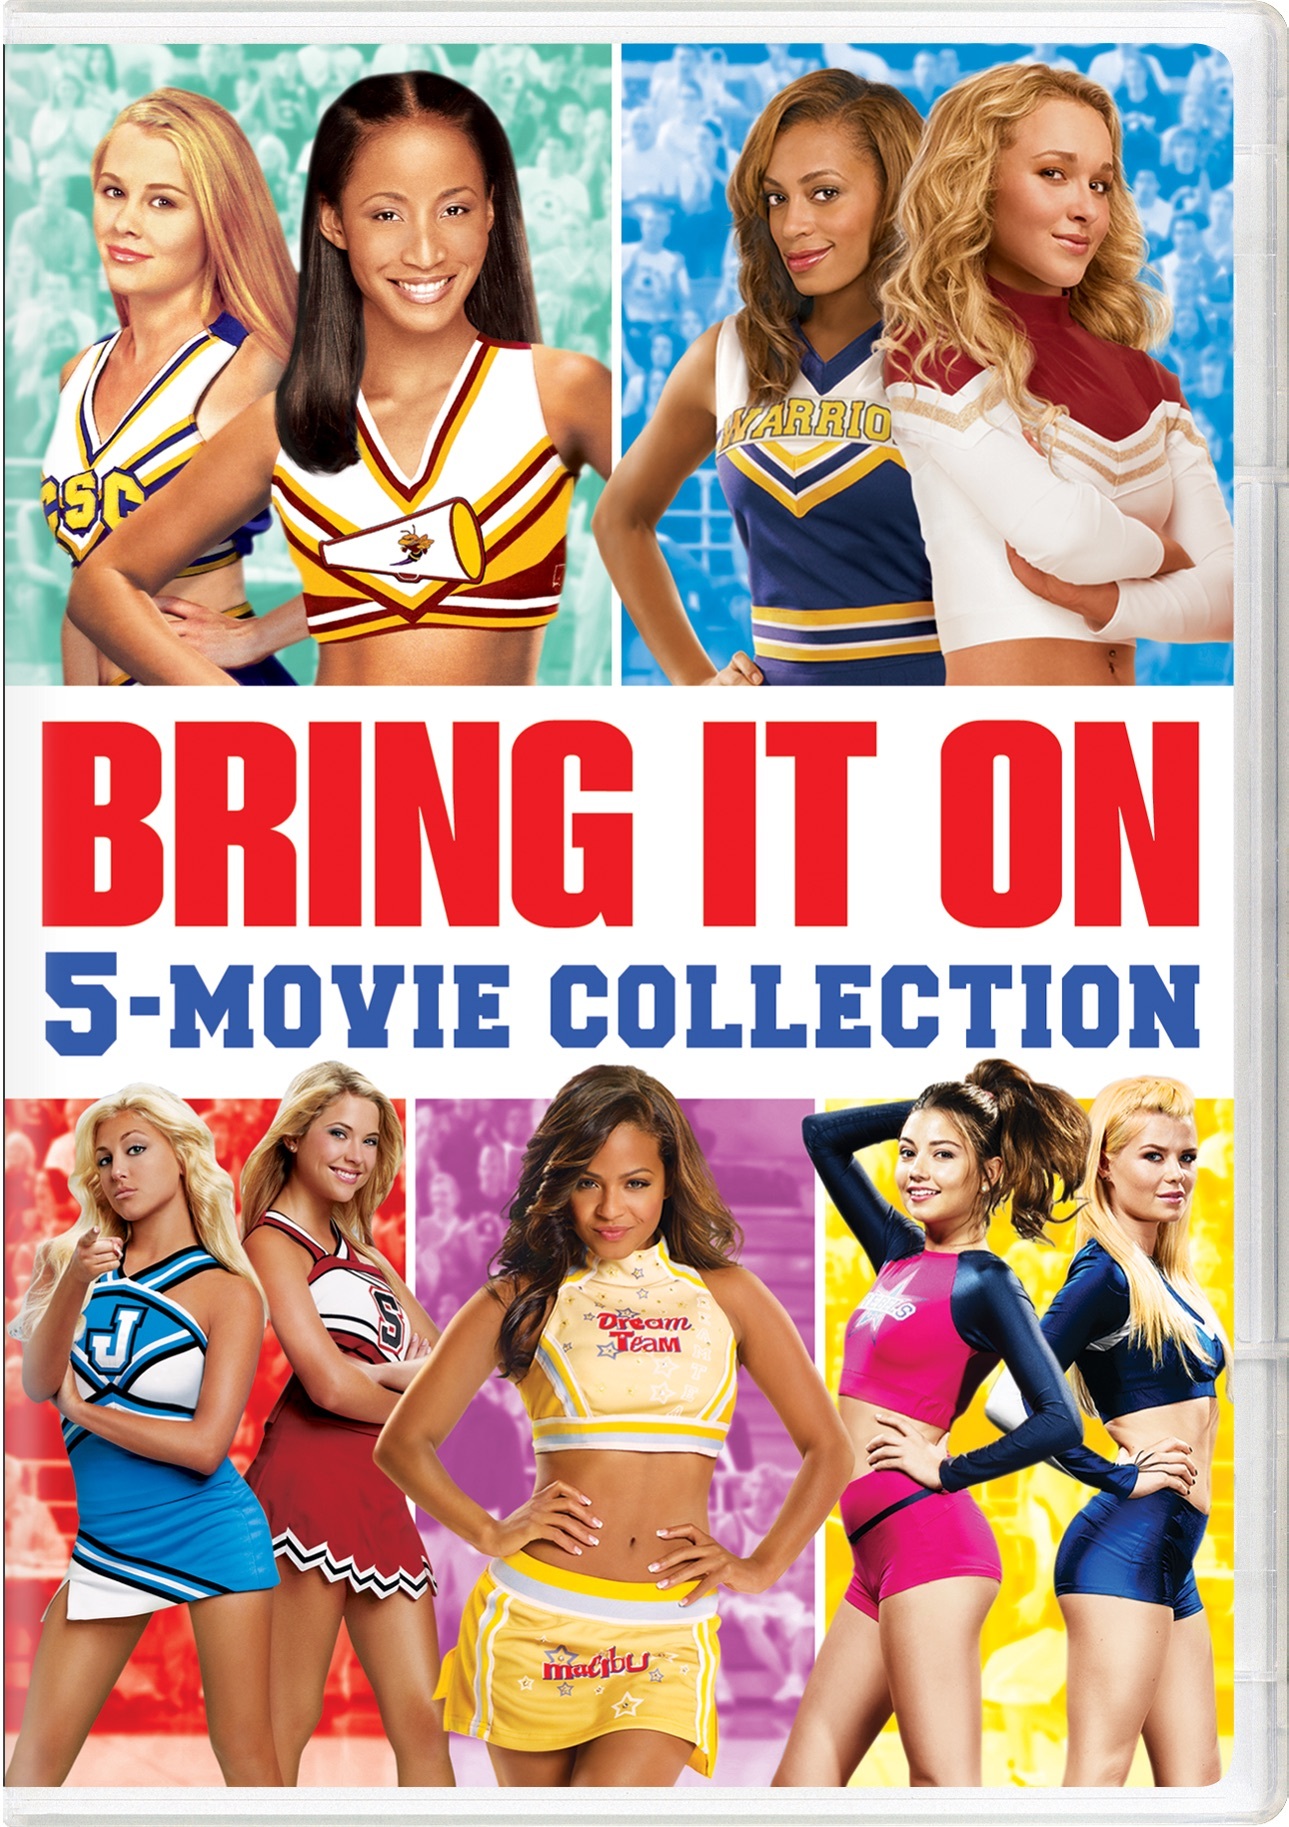 Bring It On: 5-movie Collection (Box Set) - DVD   - Comedy Movies On DVD - Movies On GRUV